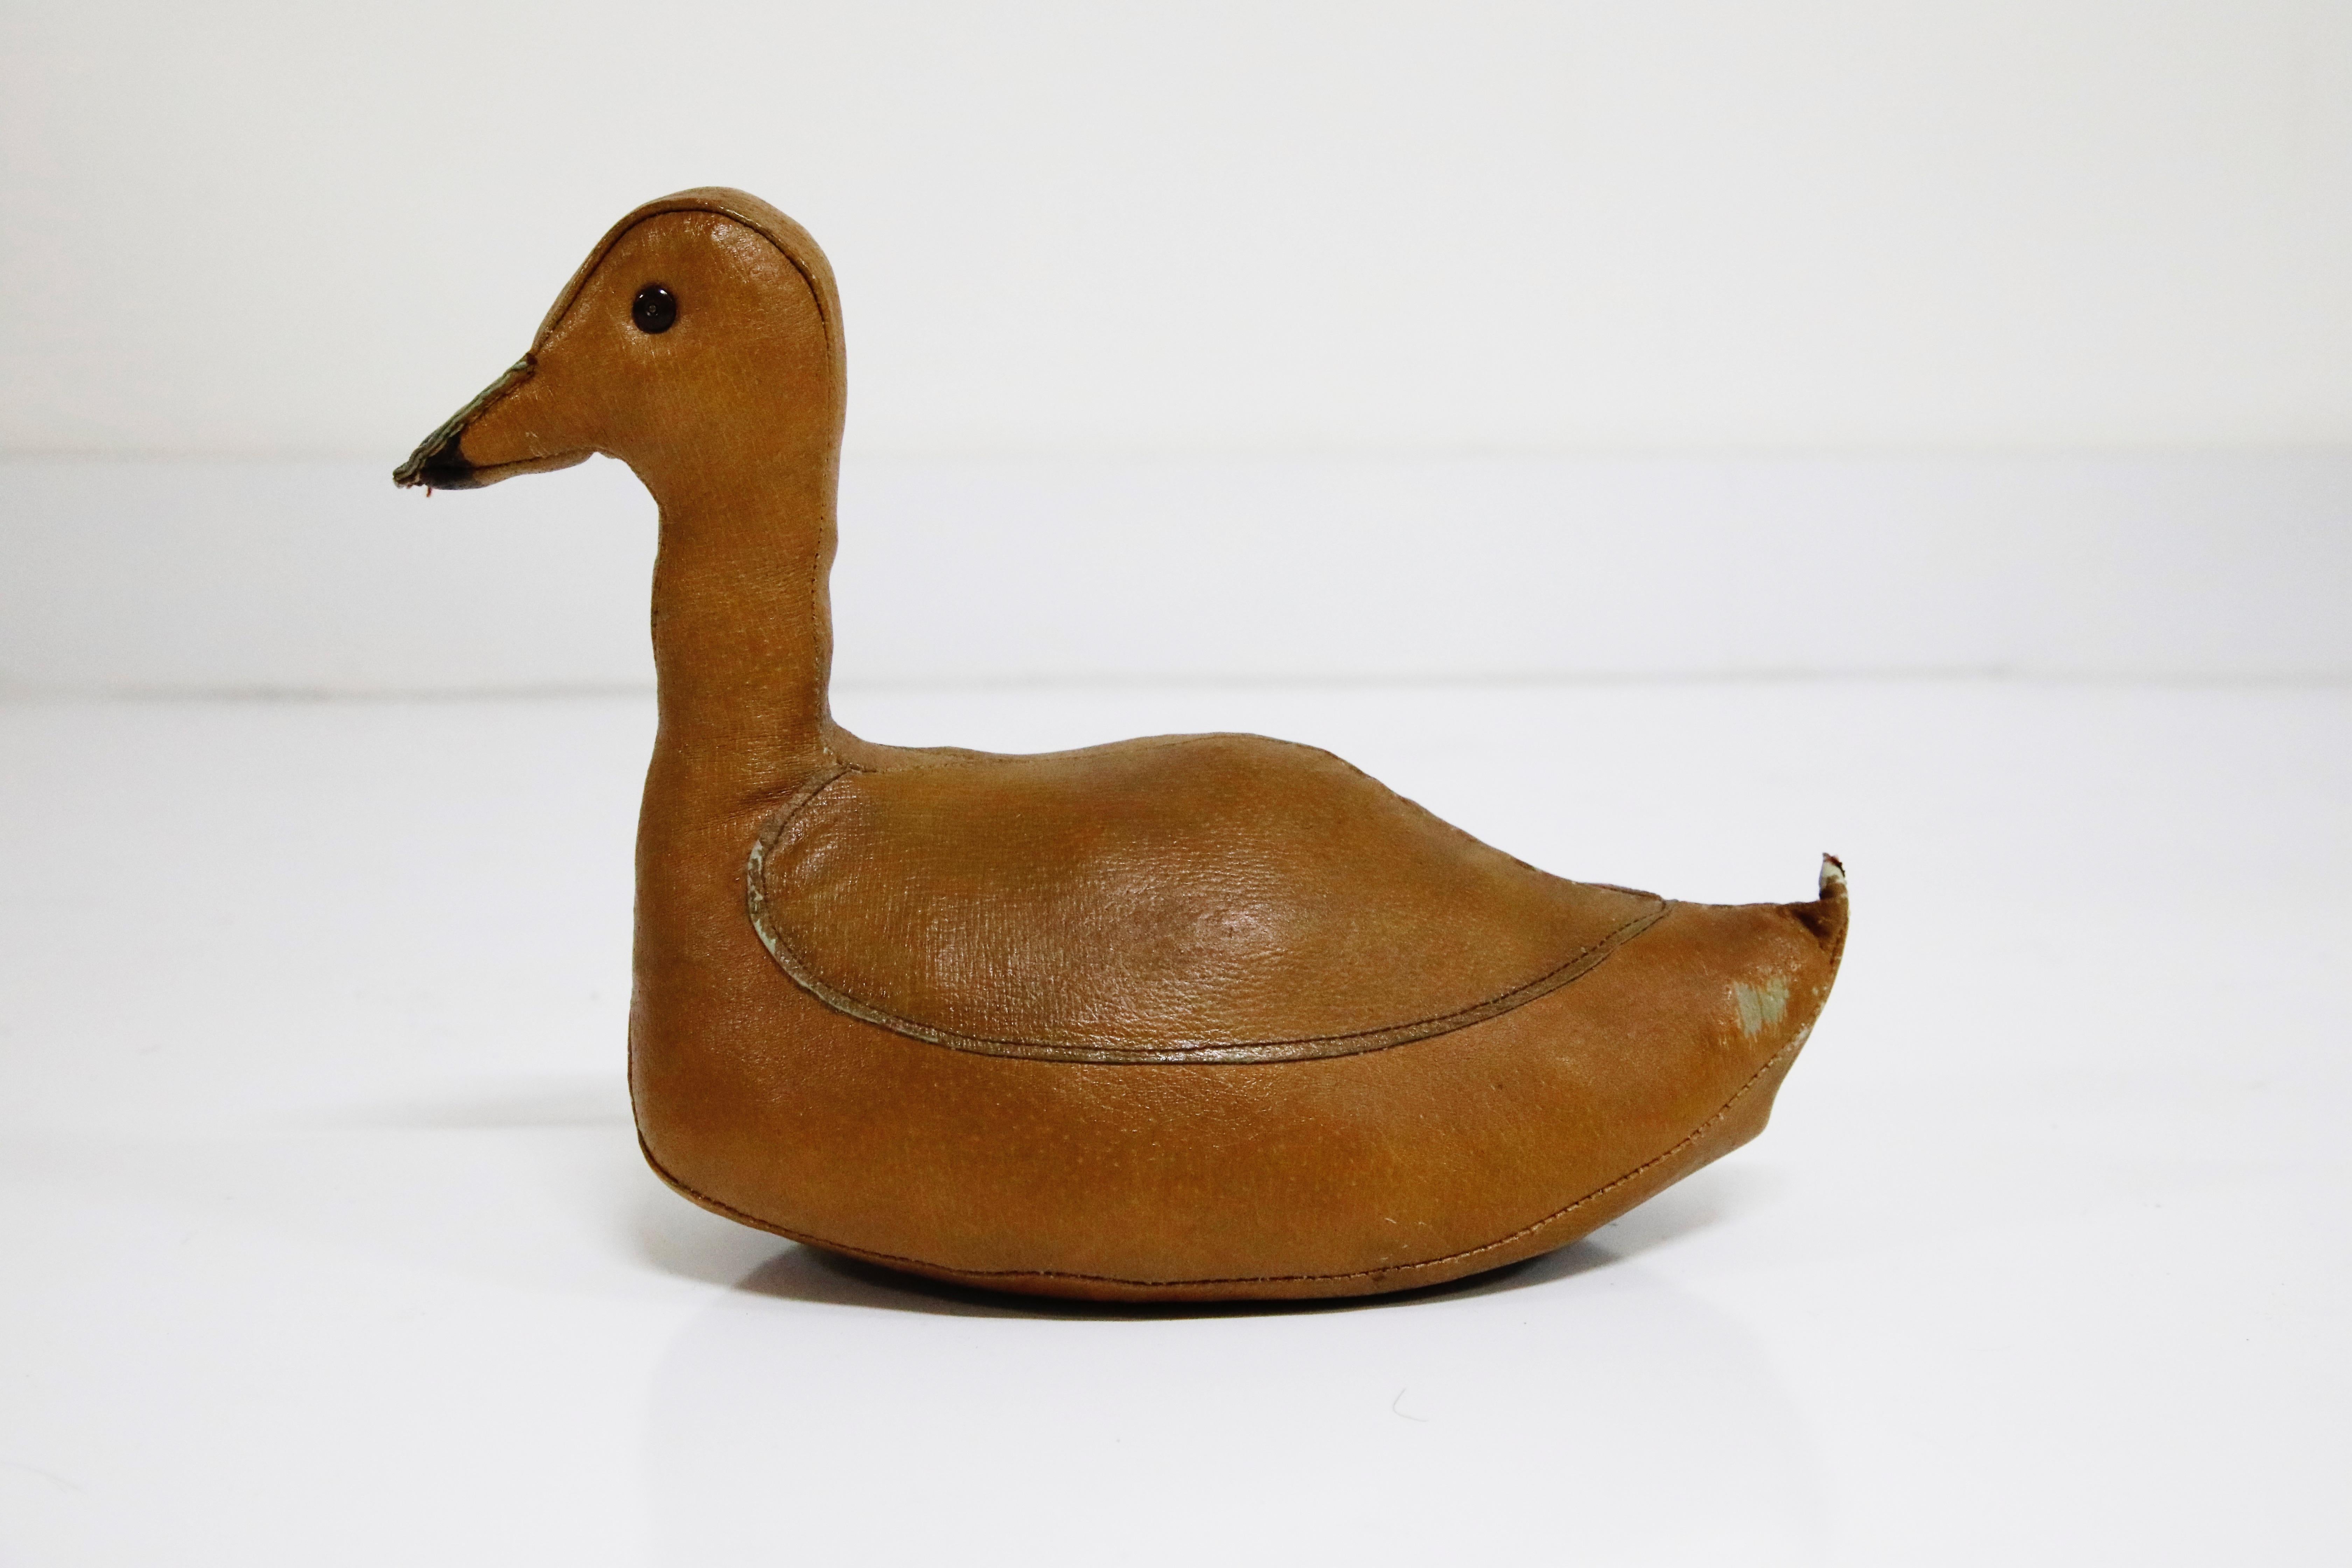 English Leather Duckie Doorstop by Dimitri Omersa for Abercrombie and Fitch, 1950s